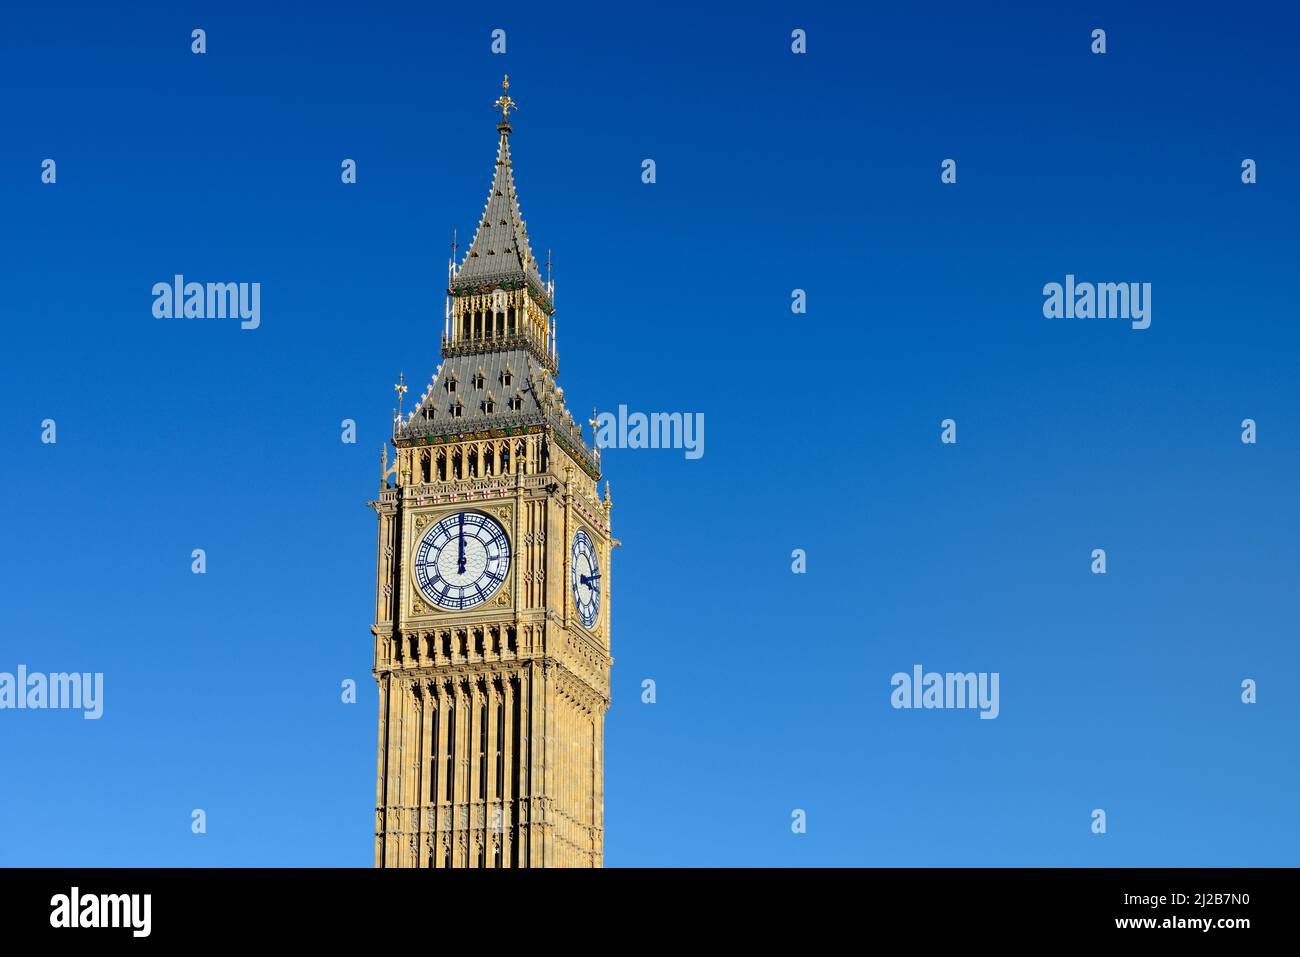 Big Ben, Elizabeth Clock Tower, Houses of Parliament, Palace of Westminster, London, United Kingdom Stock Photo